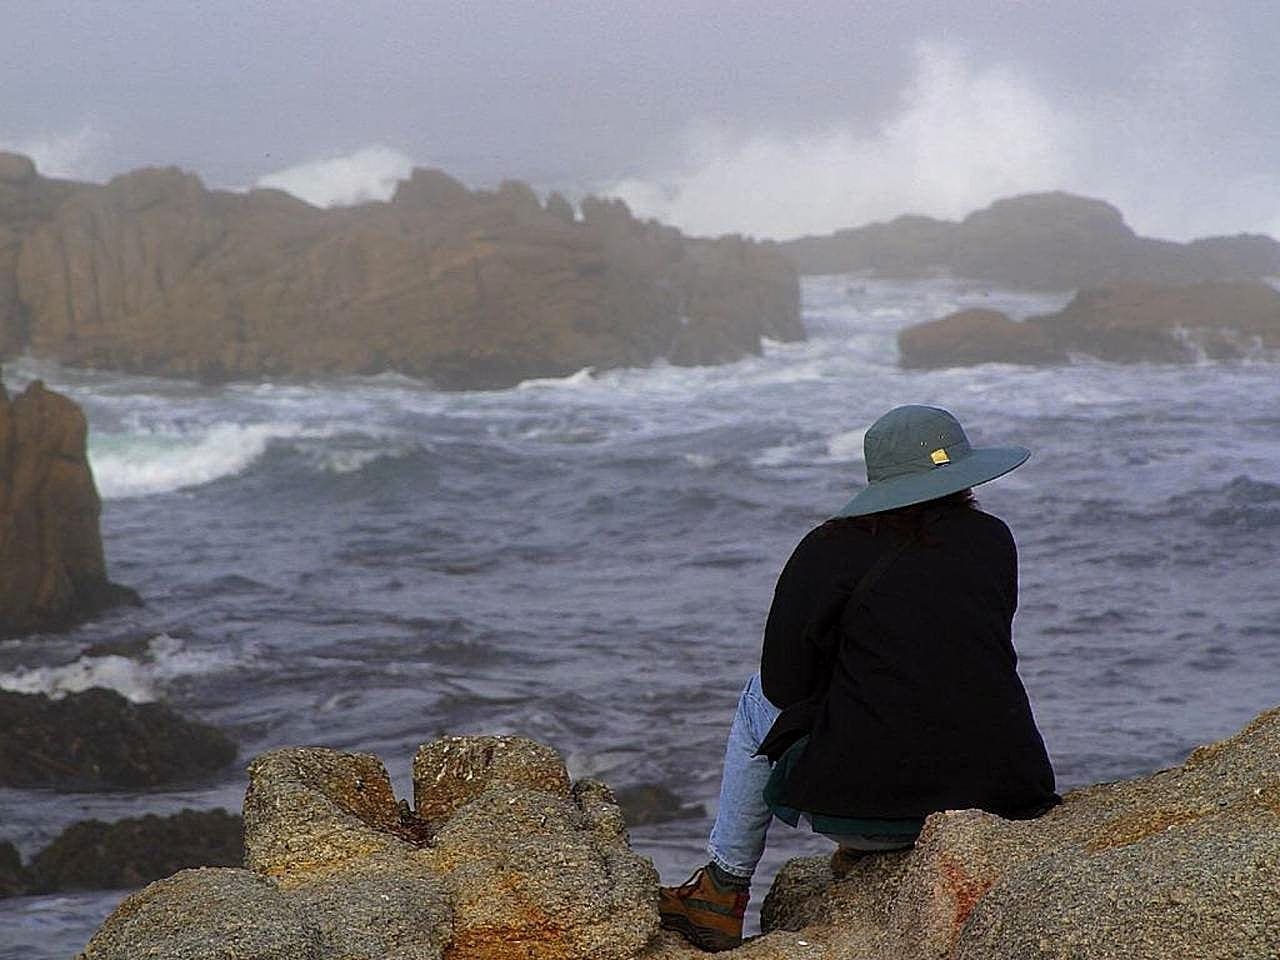 Woman in hat overlooking a rainy sea, photo credit: Pixnio